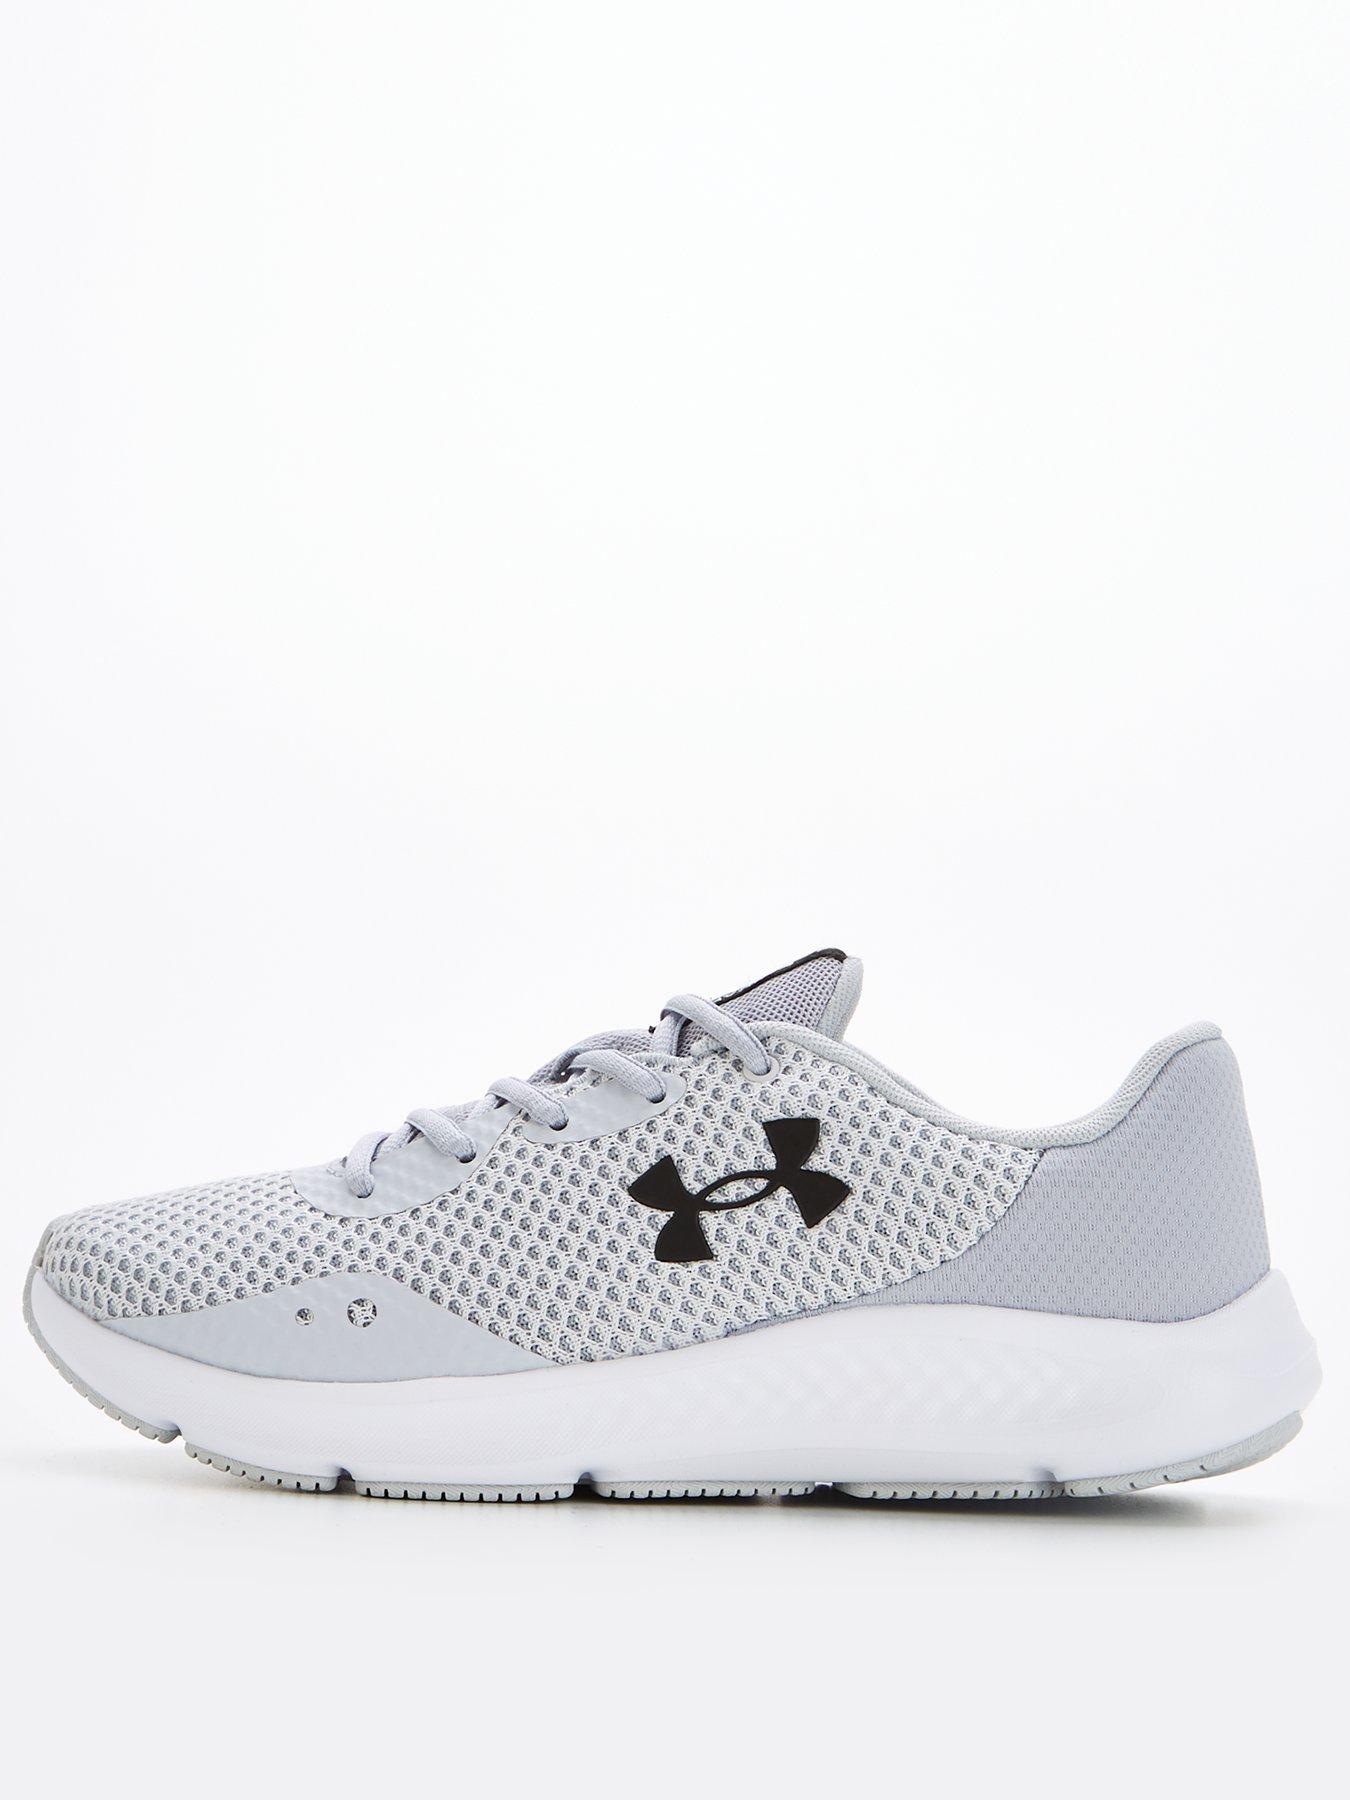 UNDER ARMOUR UA Charged Pursuit 3 Trainers - Grey/Black | very.co.uk